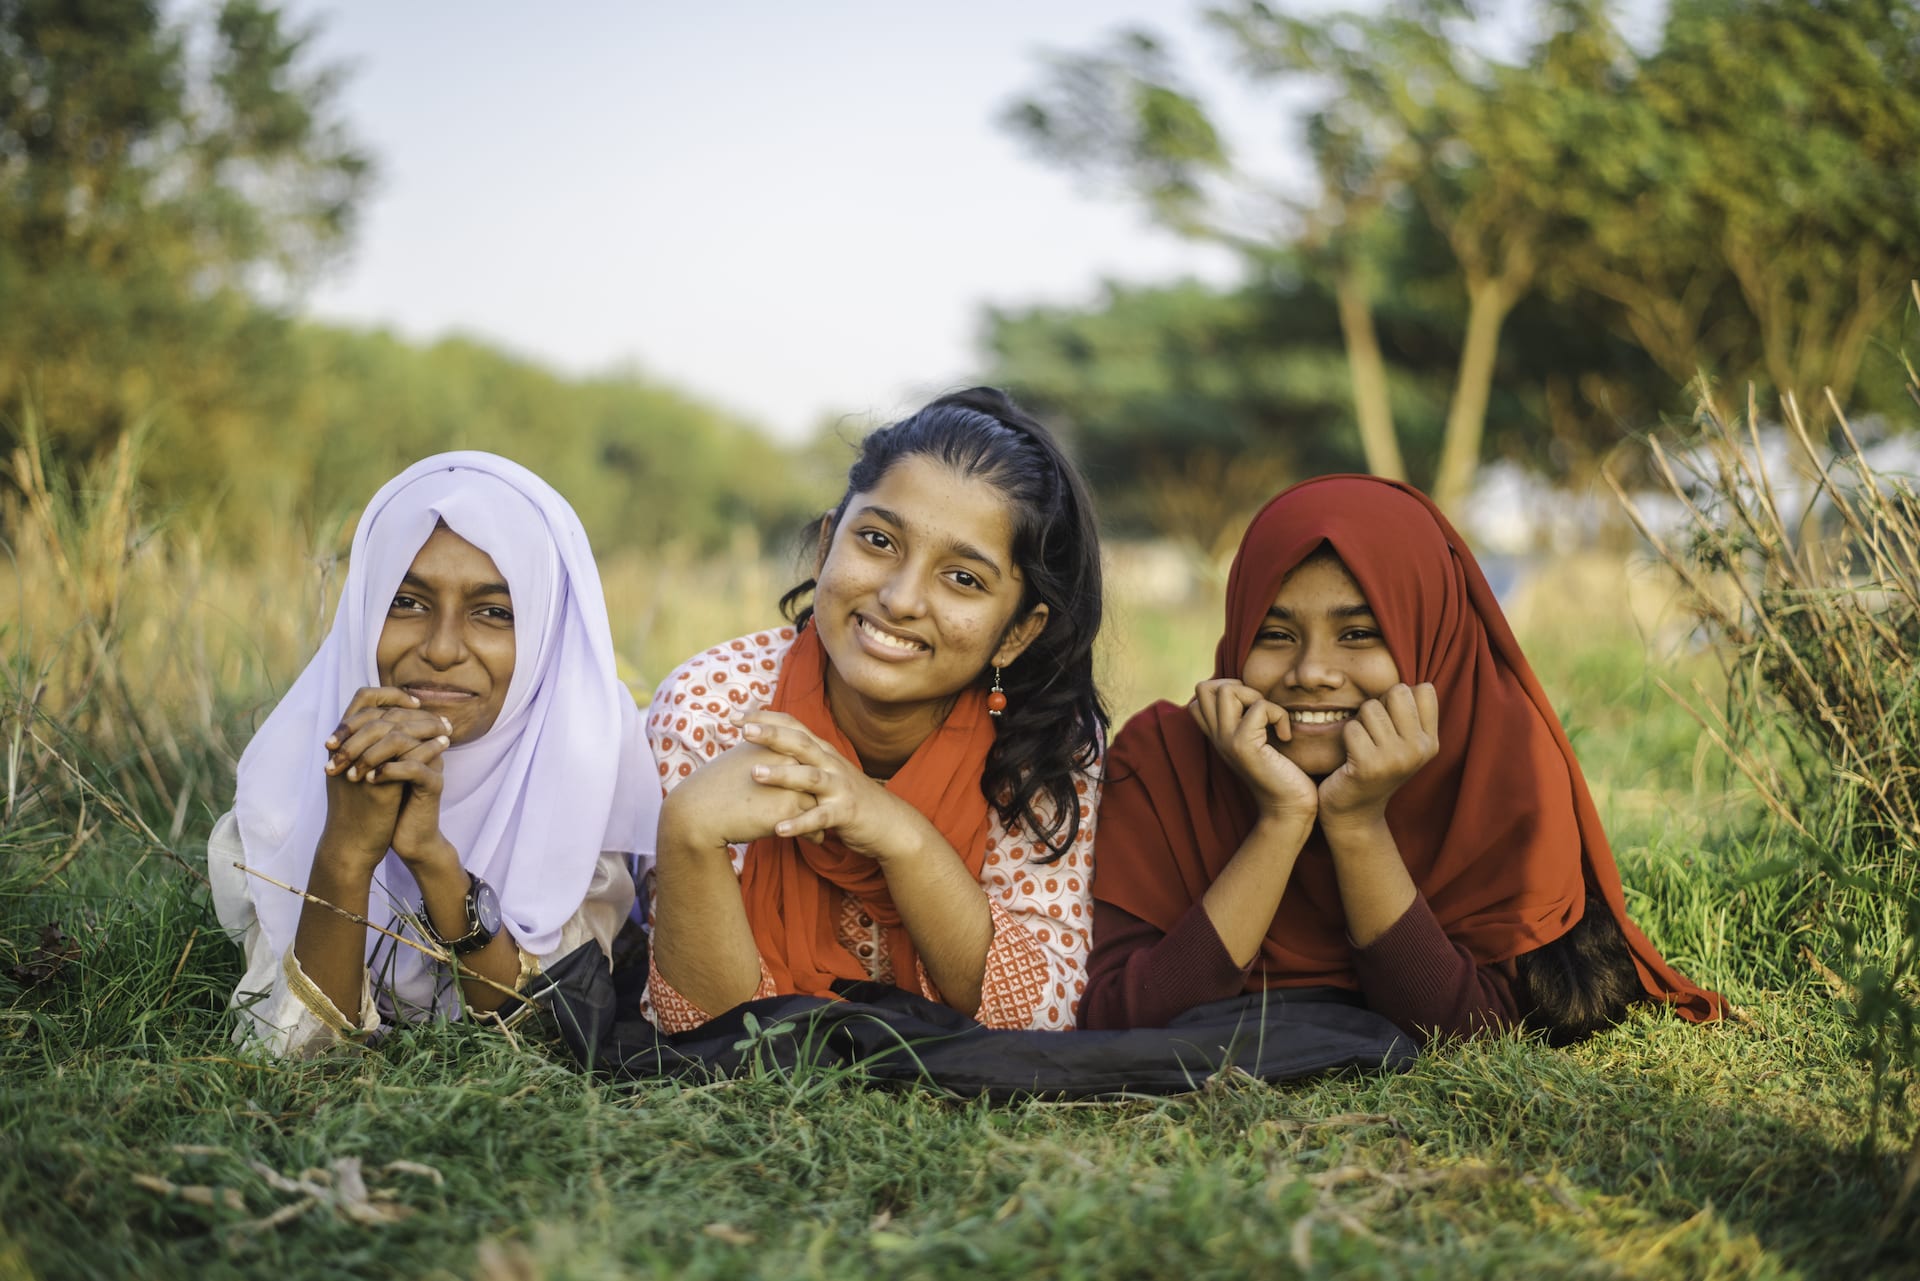 Jharna, Tisha, wearing a red and white outfit, and Munira, are laying down outside and there are trees in the background.